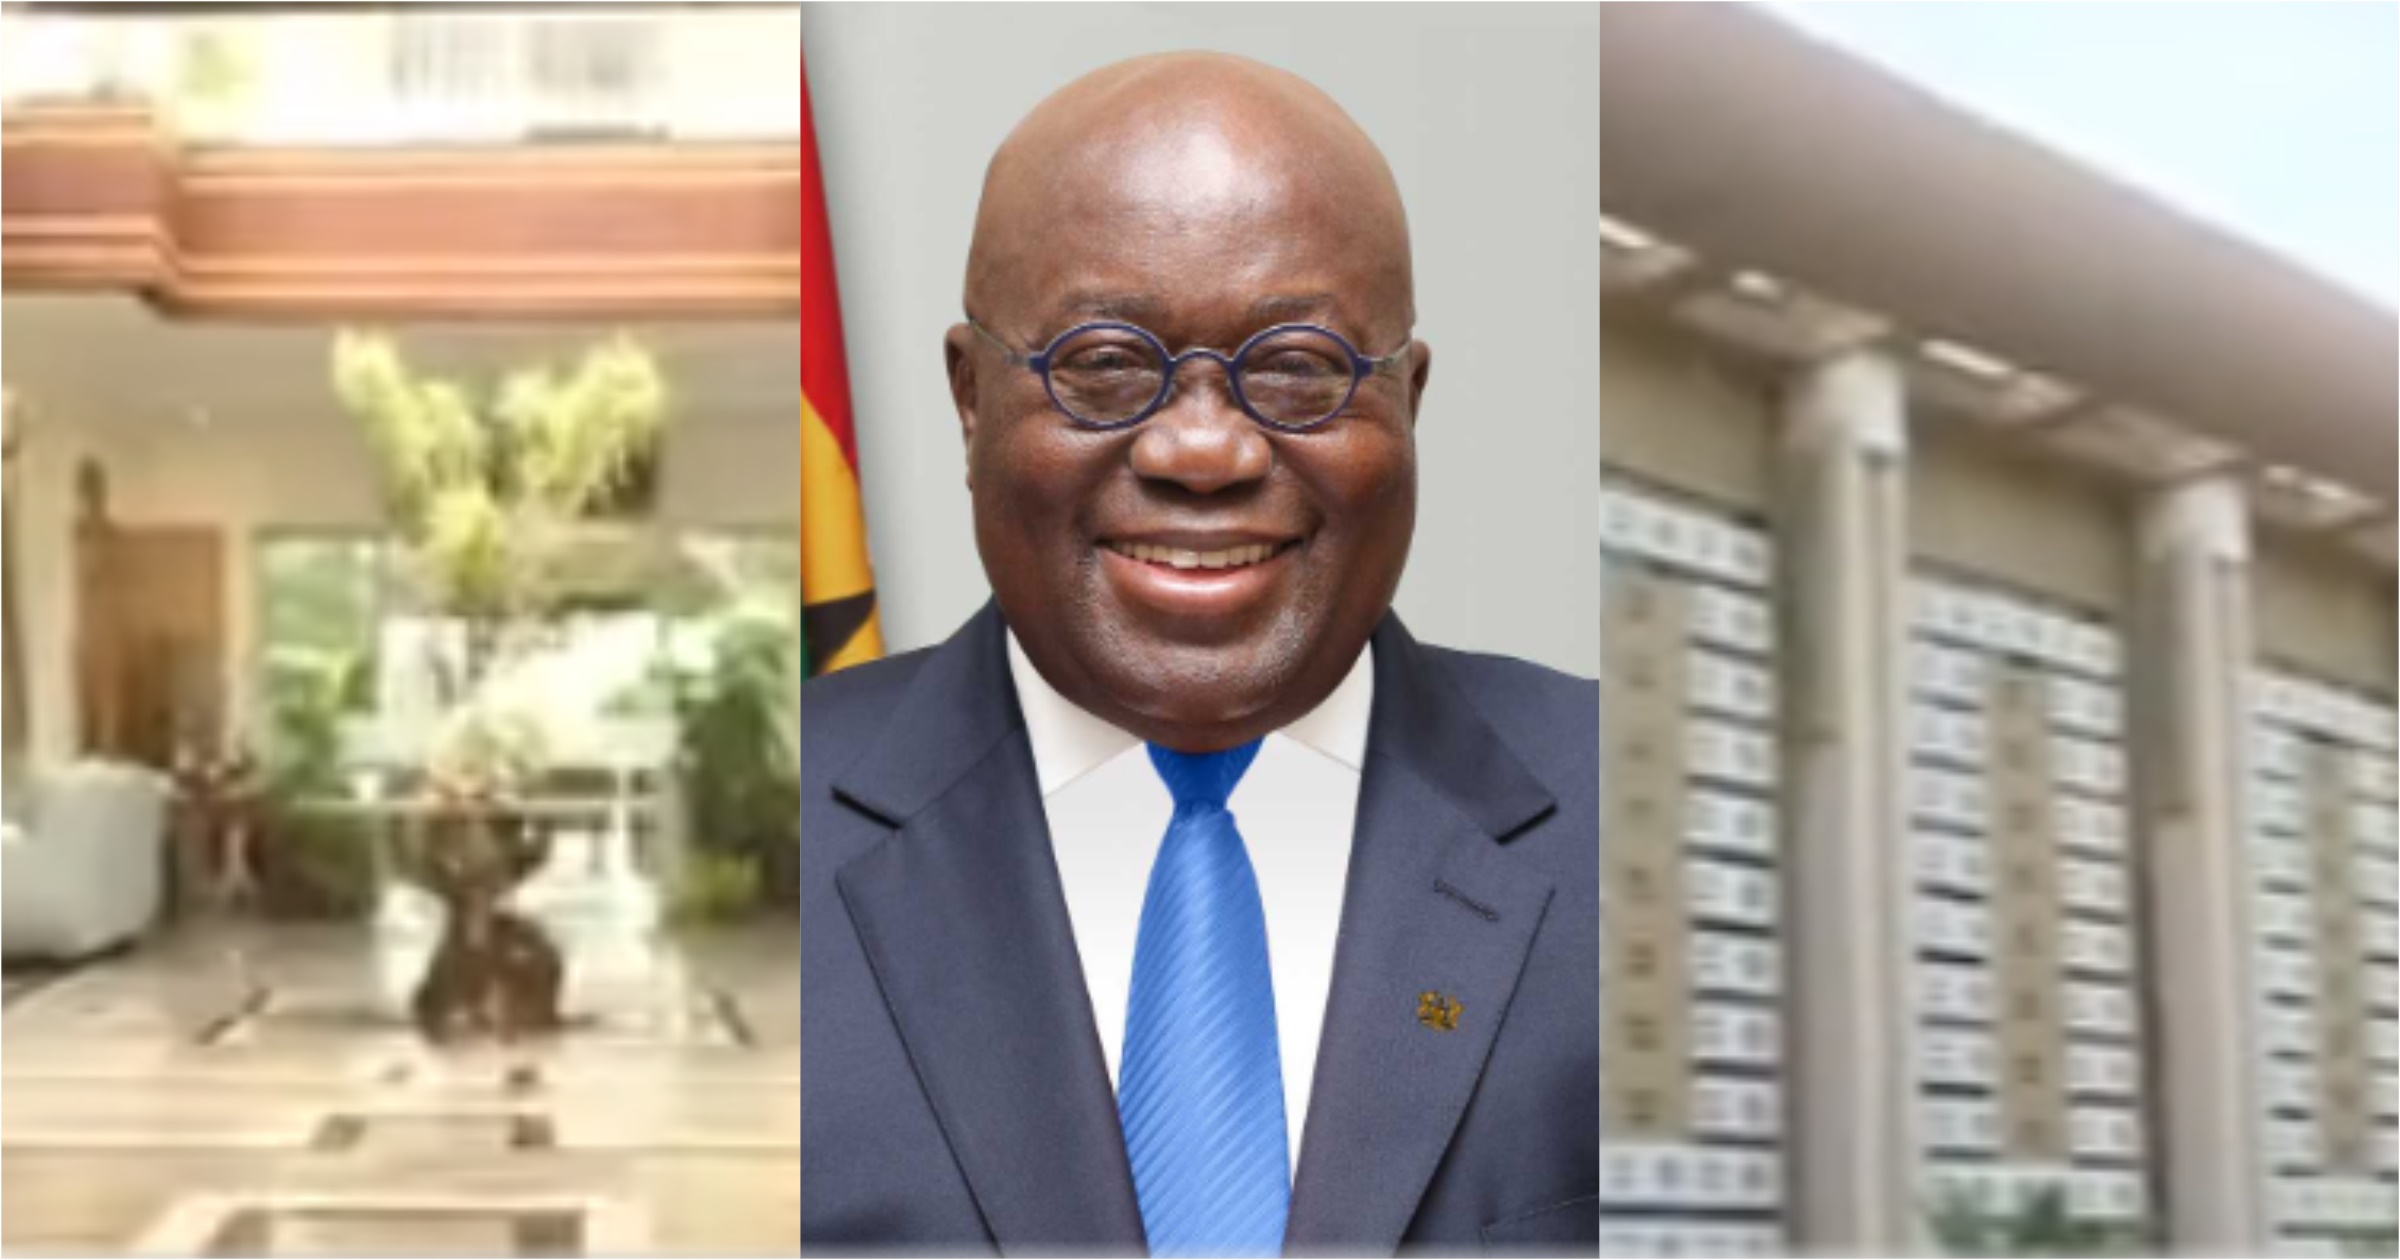 Presidential villa: A look inside the luxurious palace where Akufo-Addo is in self-isolation